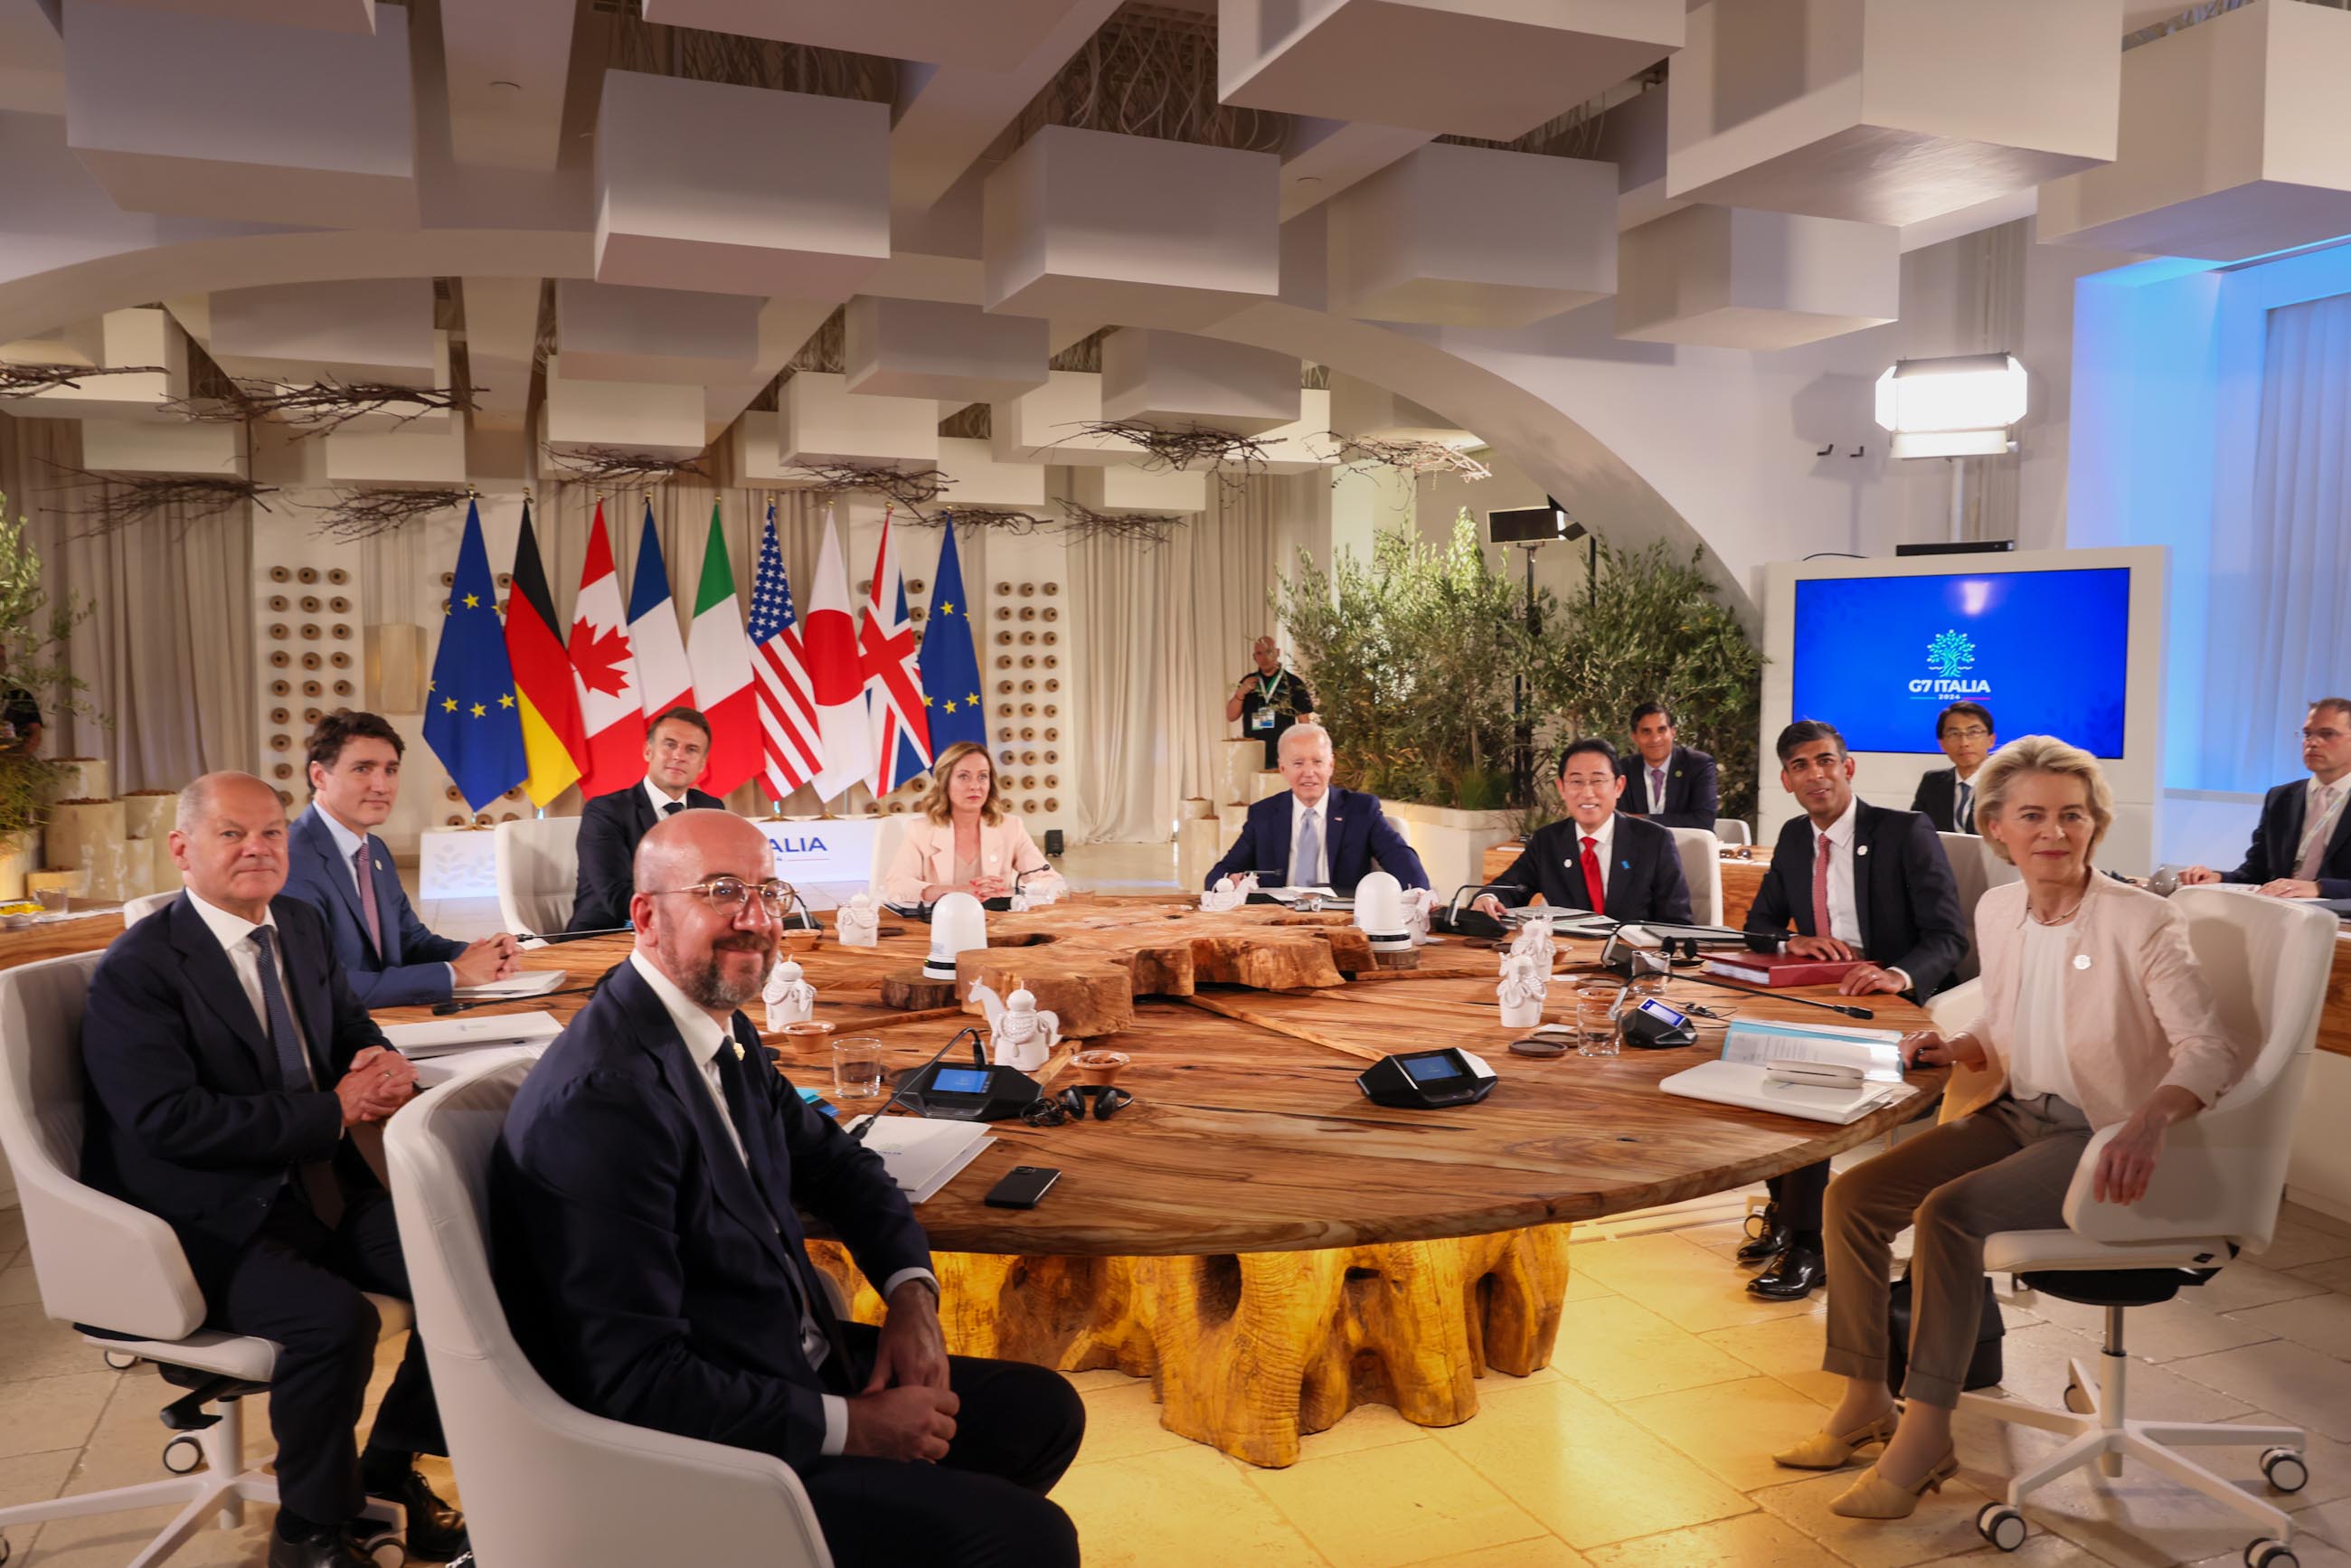 G7 Summit in Apulia and Bilateral Summit Meetings: First Day